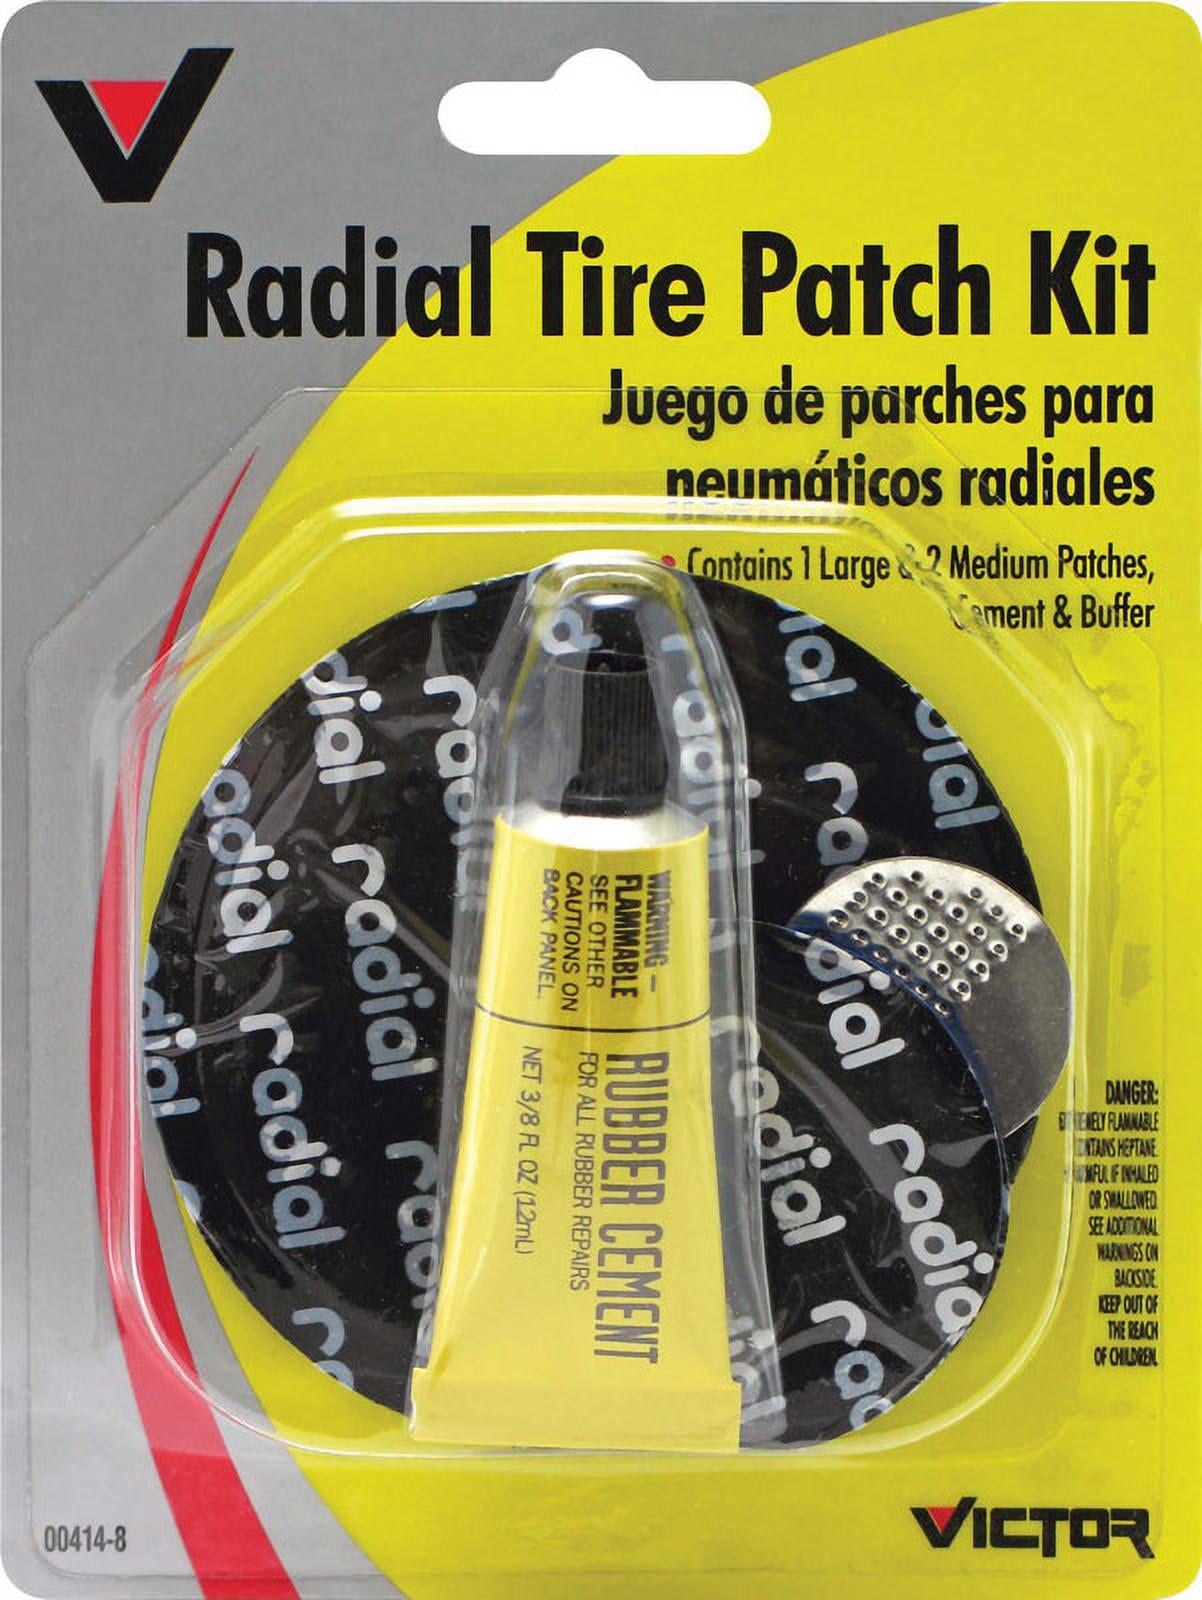 Leather Repair Patch Kit 8 x 12 inch, 7 Colors Available